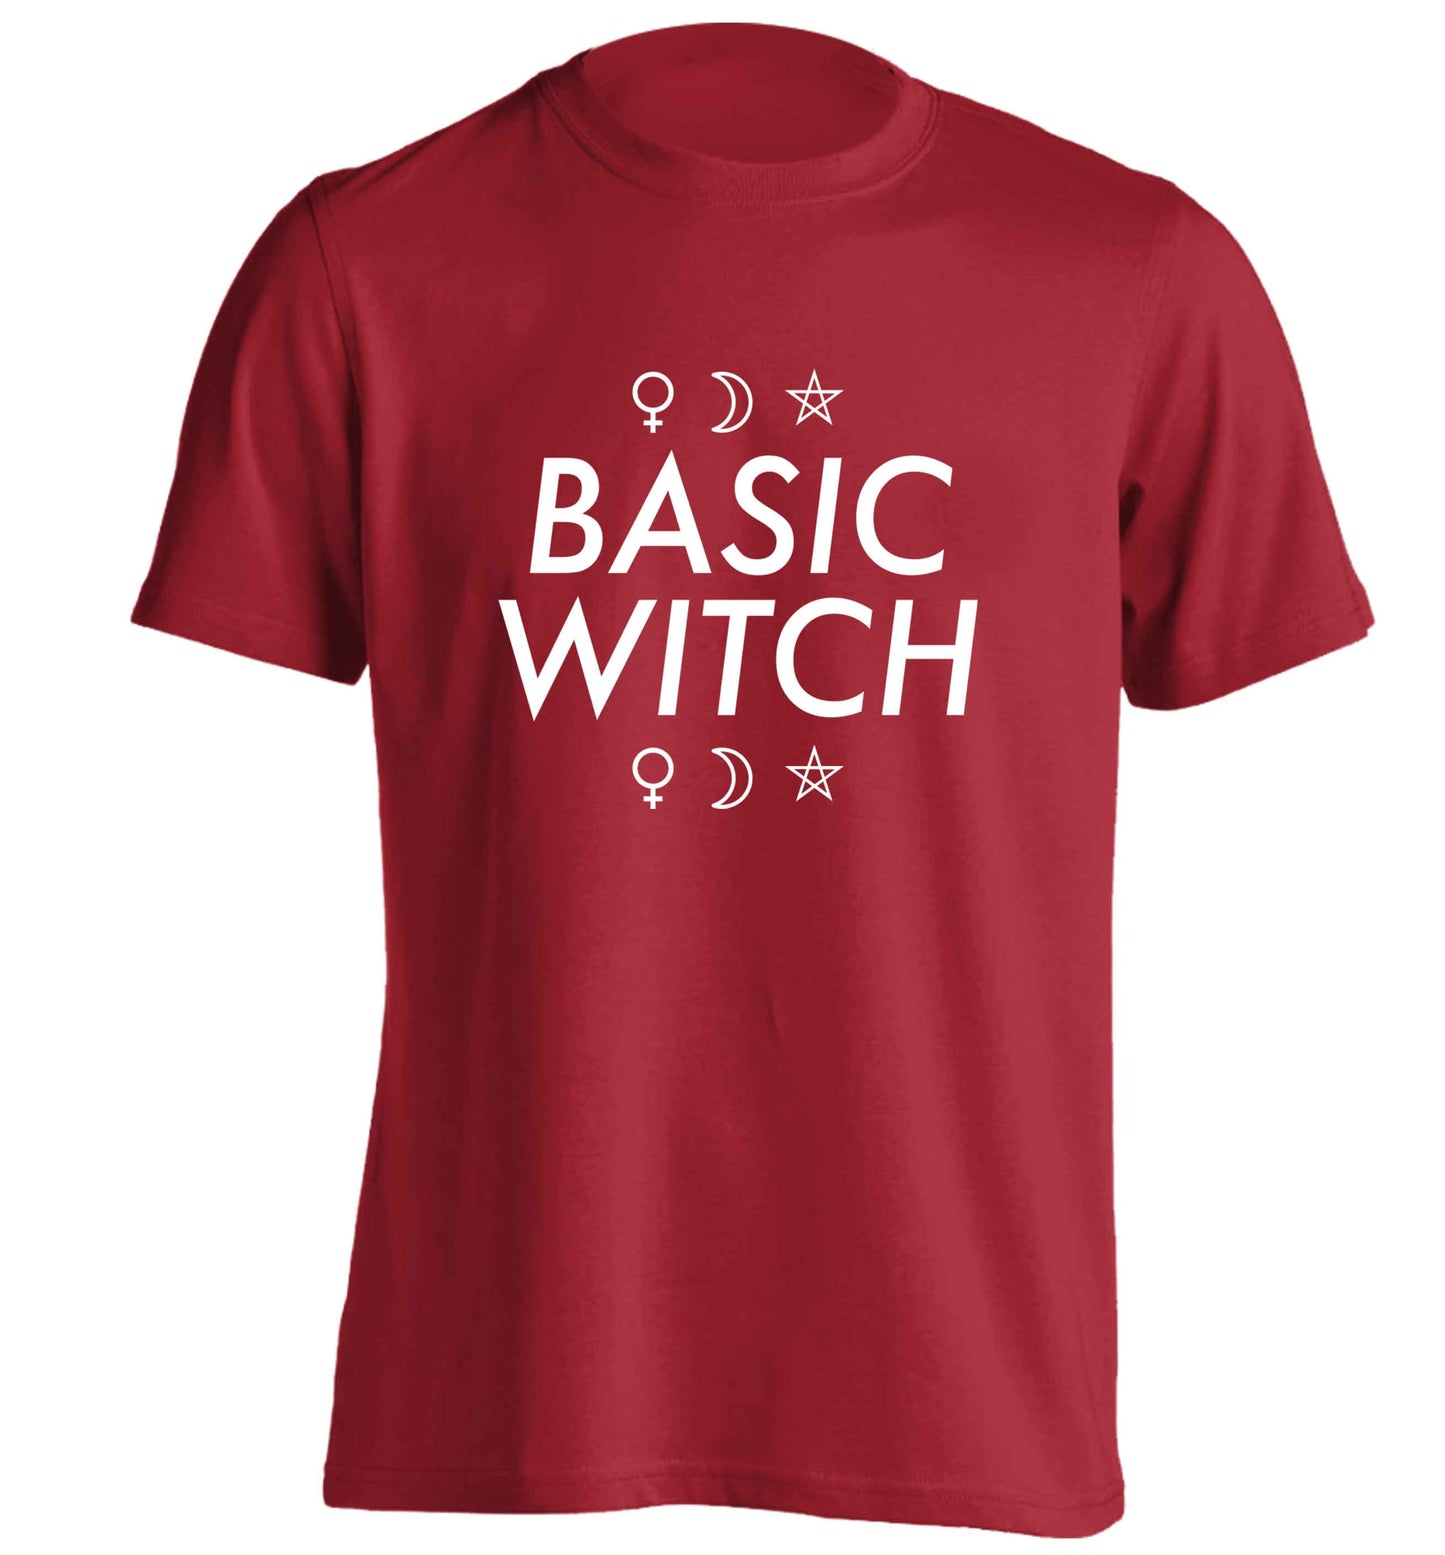 Basic witch 1 adults unisex red Tshirt 2XL